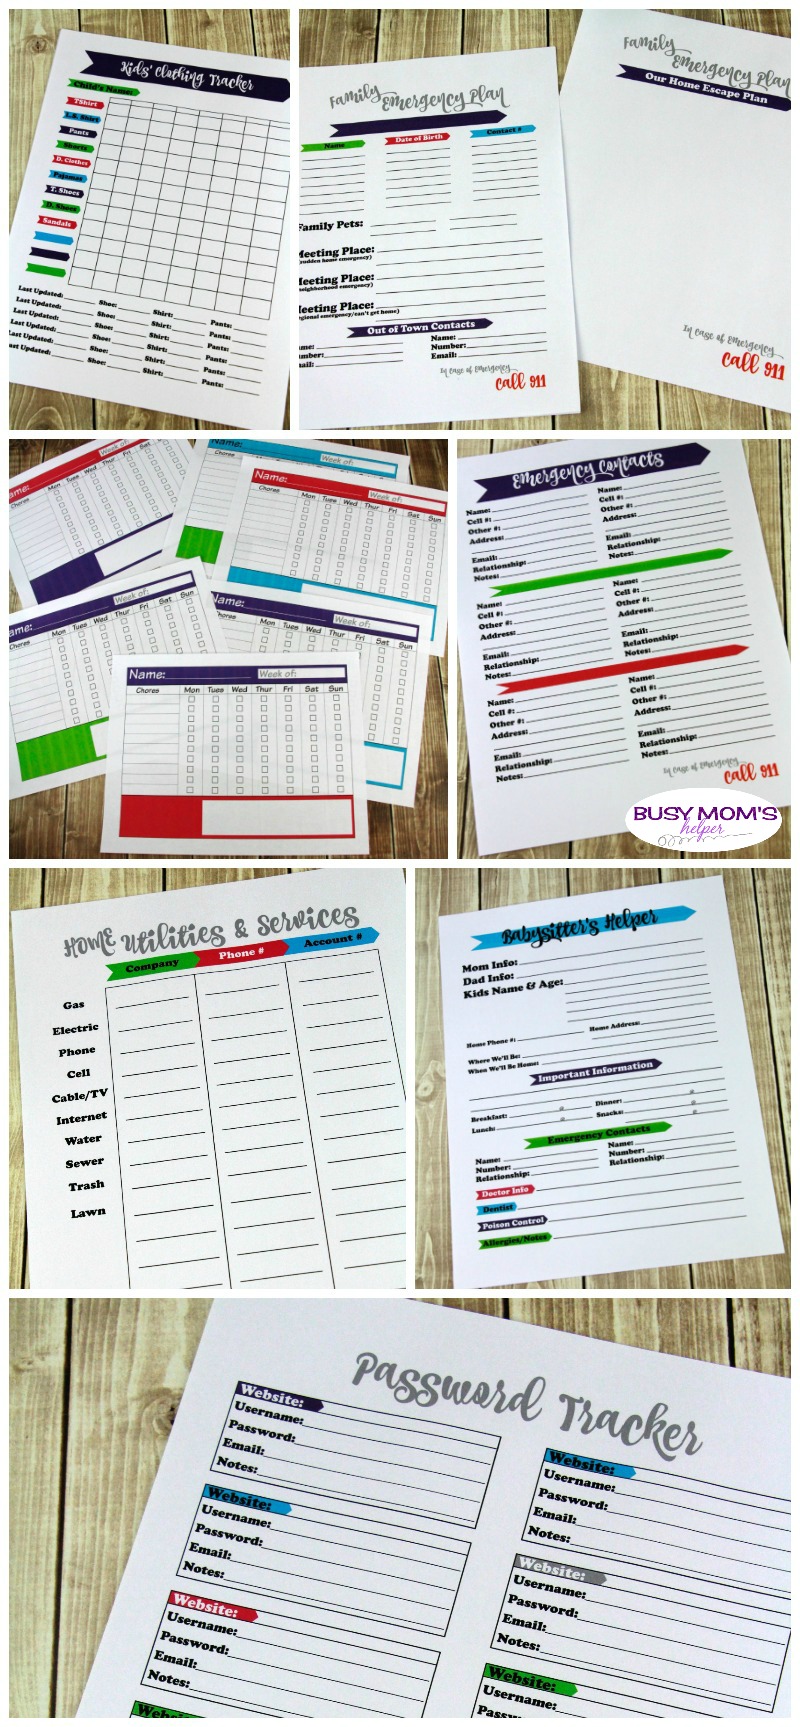 Ultimate Set of Printables for Busy Families! Practically every printable a busy family could use - over 70 pages PLUS two BONUS items! Help get organized with categories like: Money, Scheduling/Time Management, Kitchen/Meal Planning, Security & Home Management, as well as Trip Planning! #printables #busymom #busyparents #busyfamily #busyfamilies #printableset #parenting #moms #money #homemanagement #timemanagement